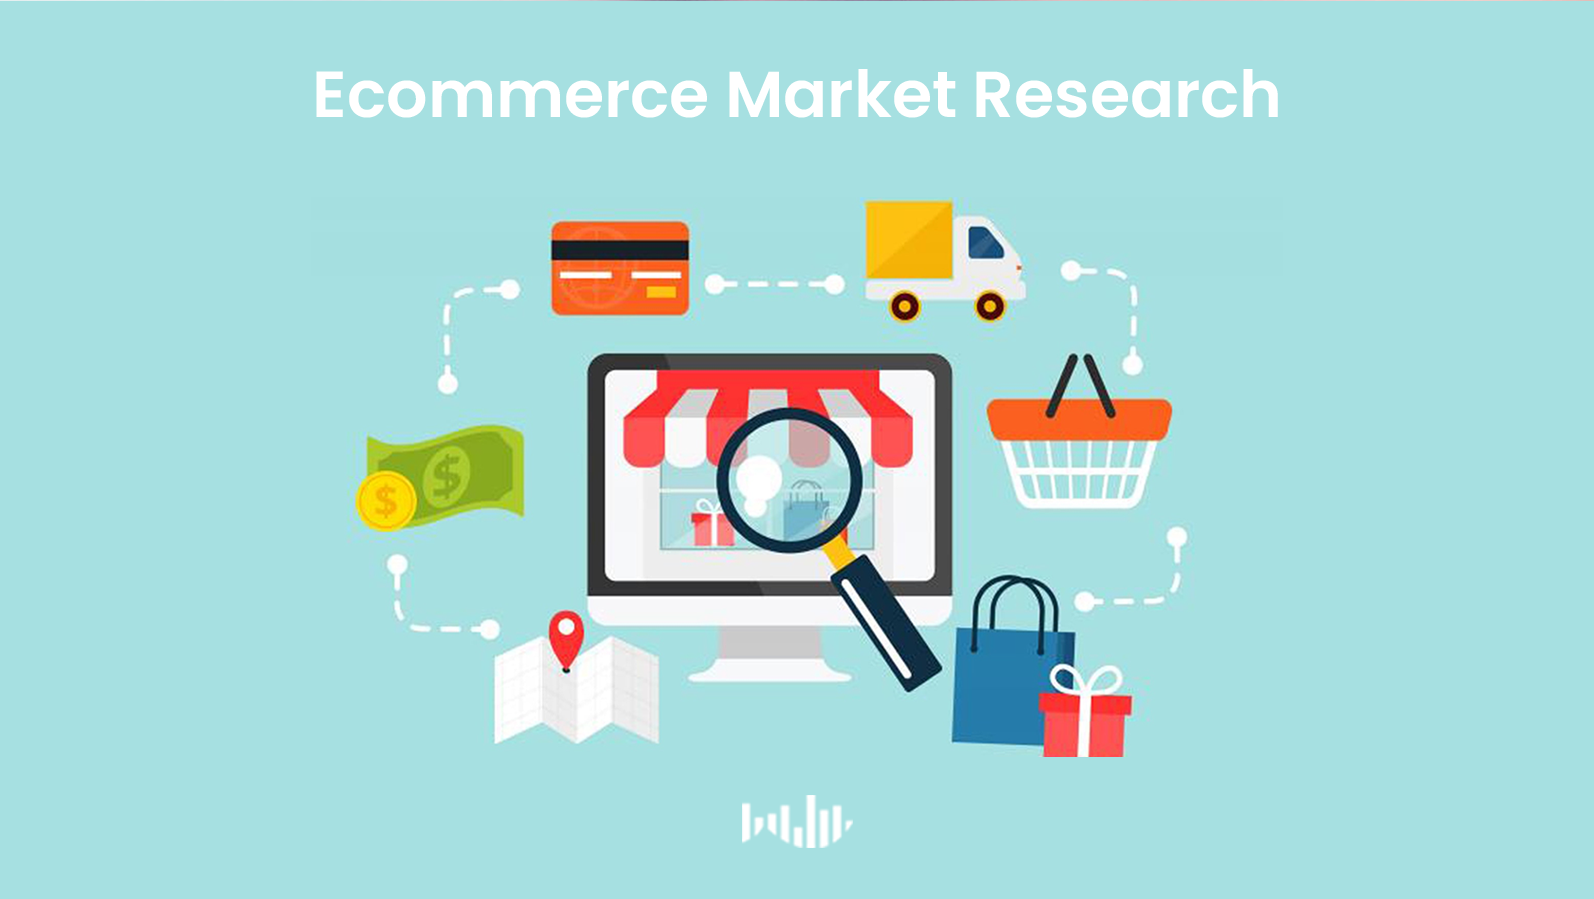 eCommerce market research